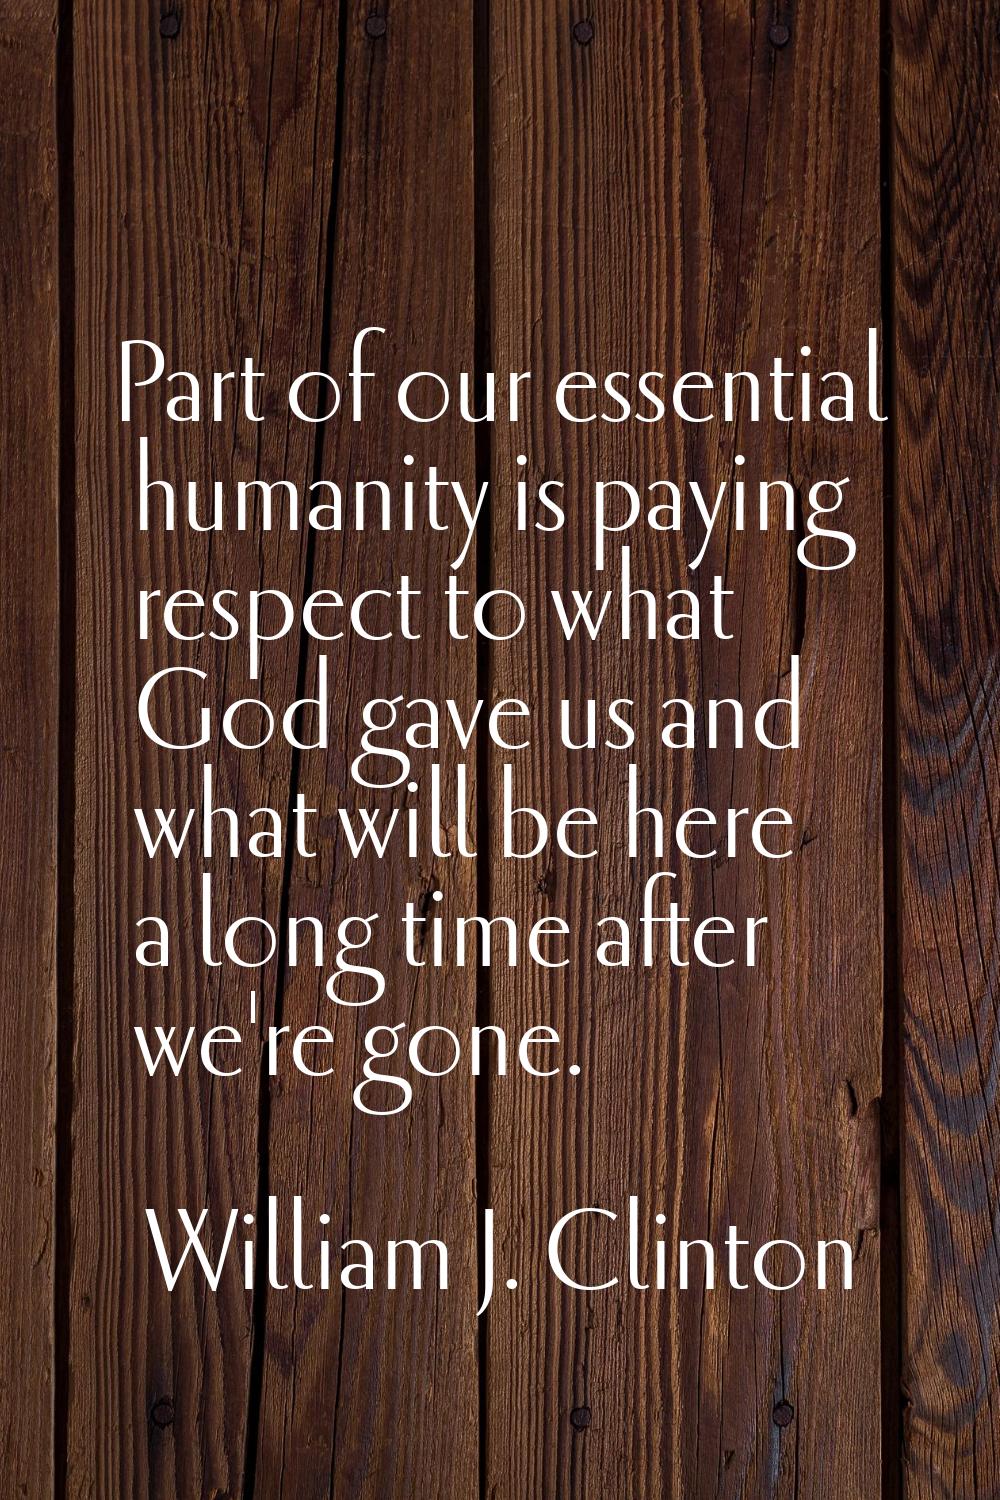 Part of our essential humanity is paying respect to what God gave us and what will be here a long t